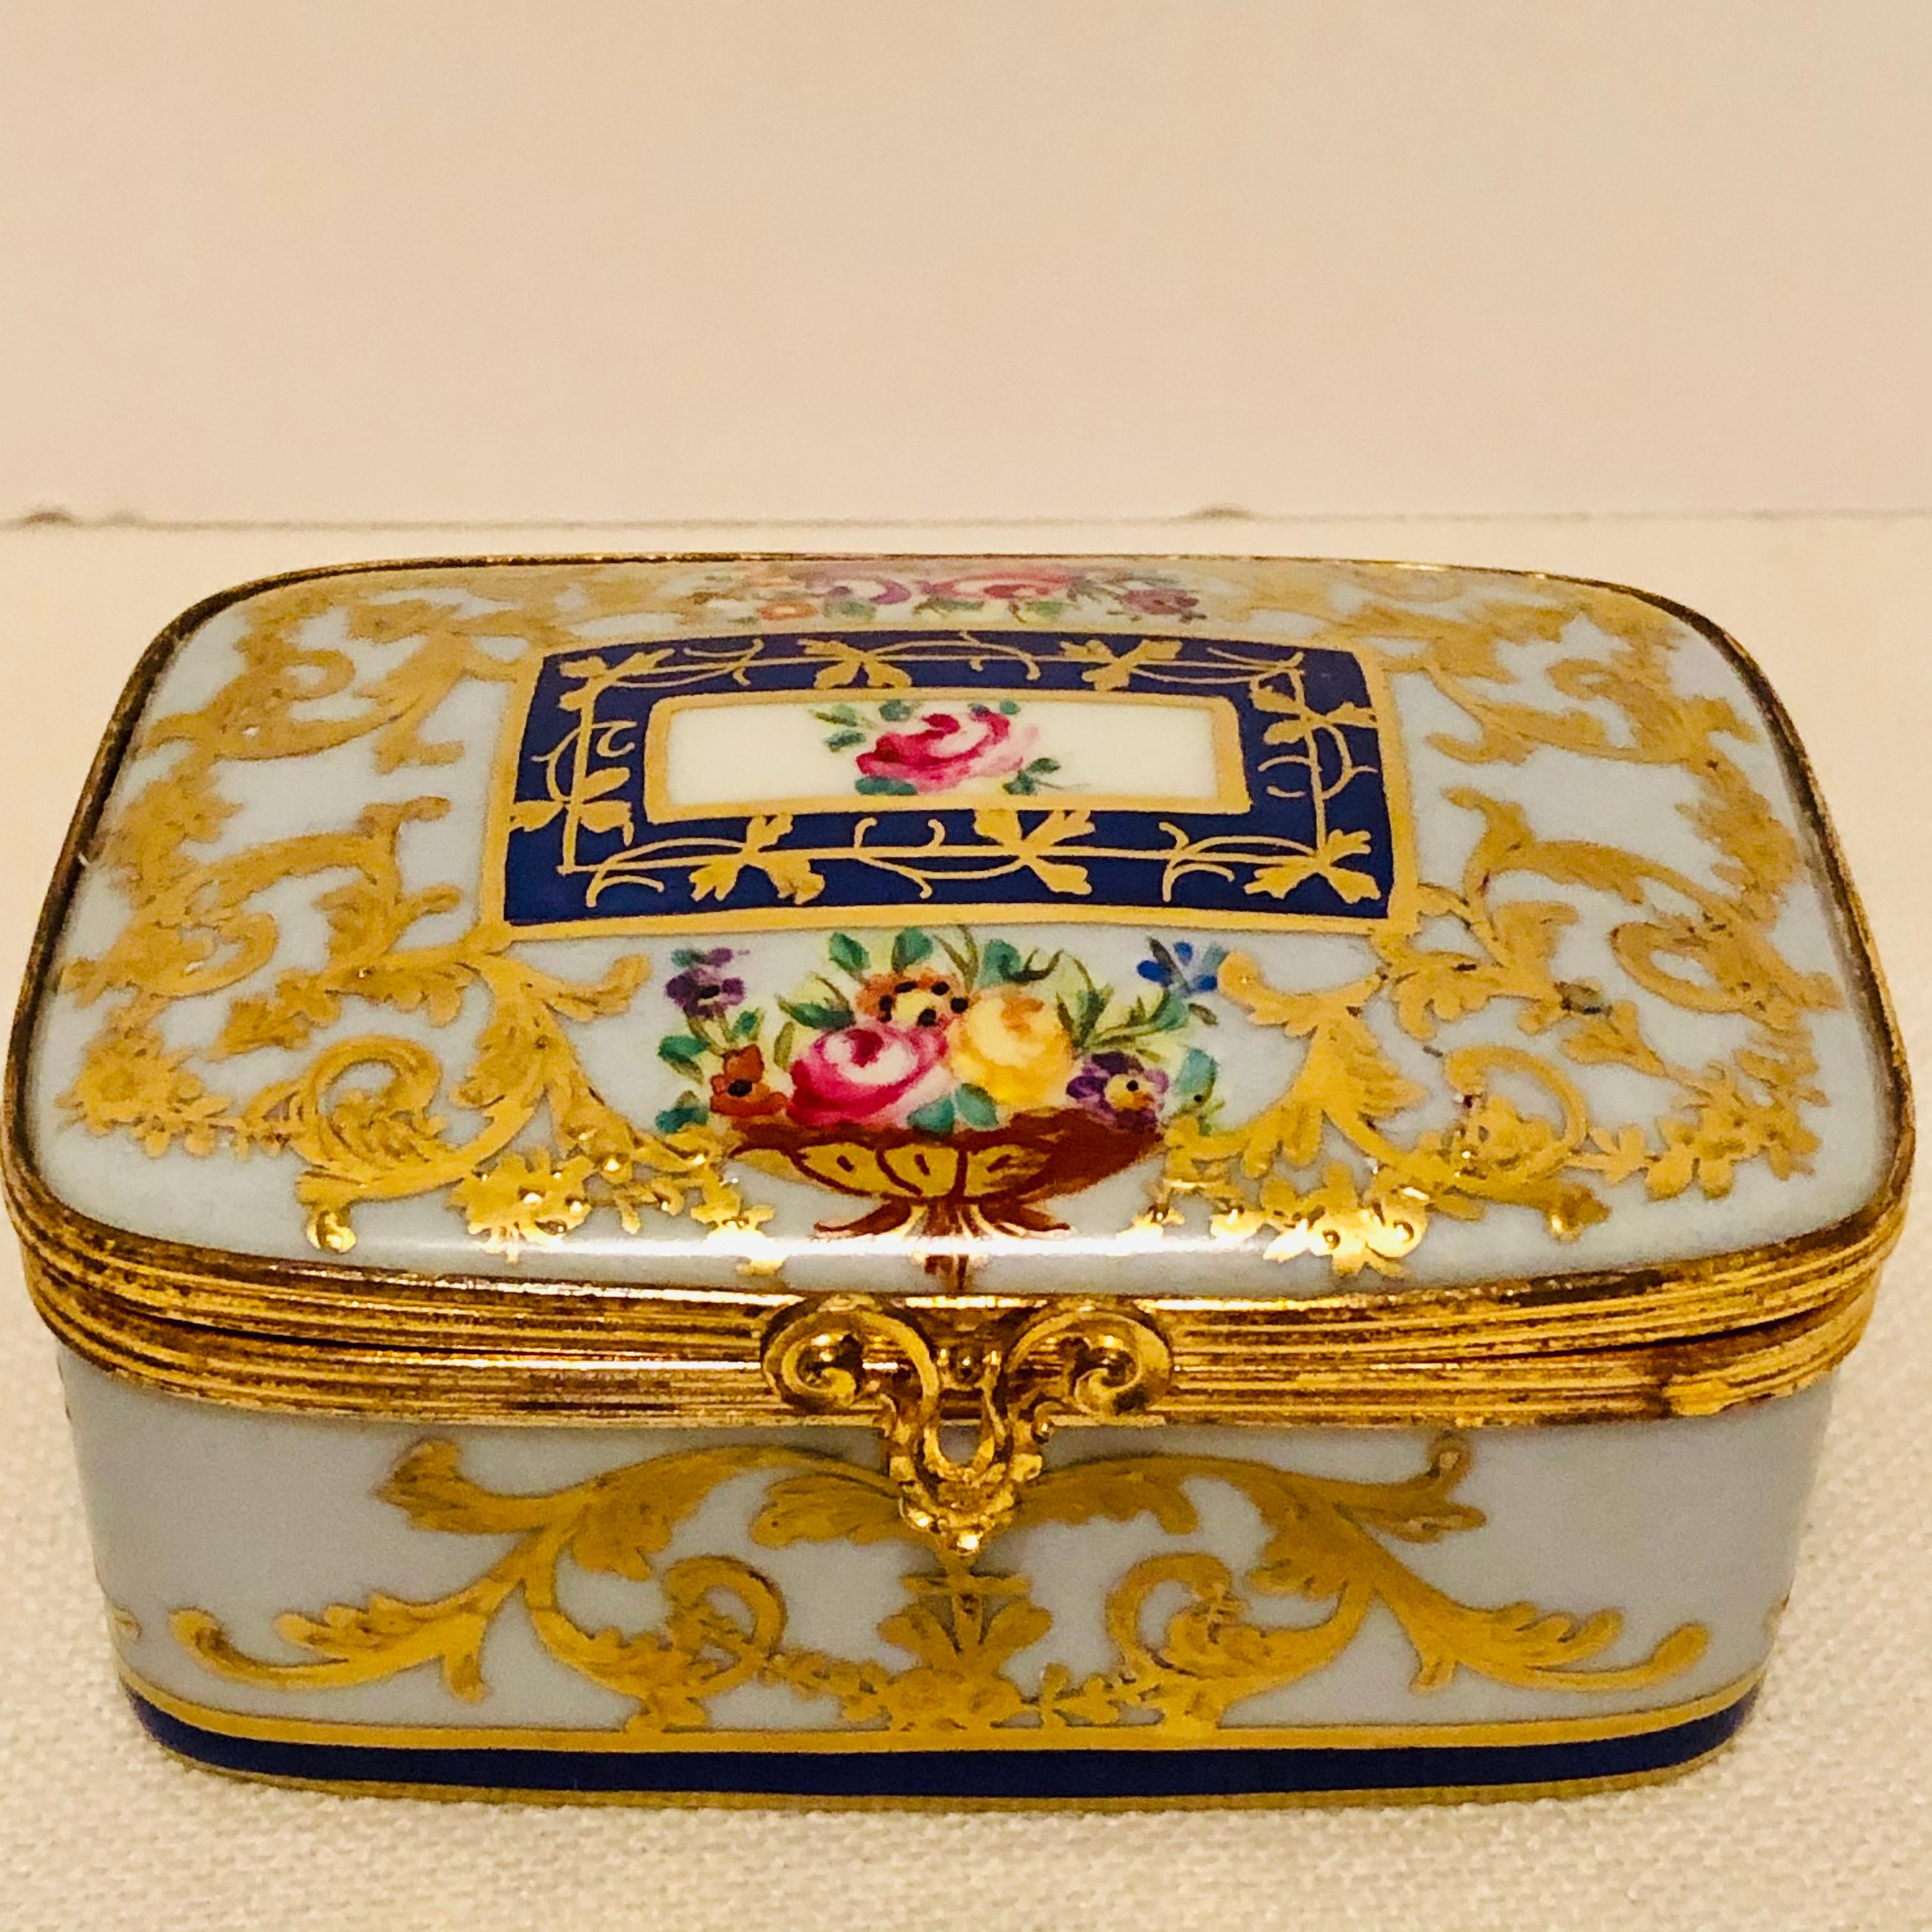 Rococo Le Tallec Porcelain Box with Decorated with Flower Bouquets and Raised Gilding